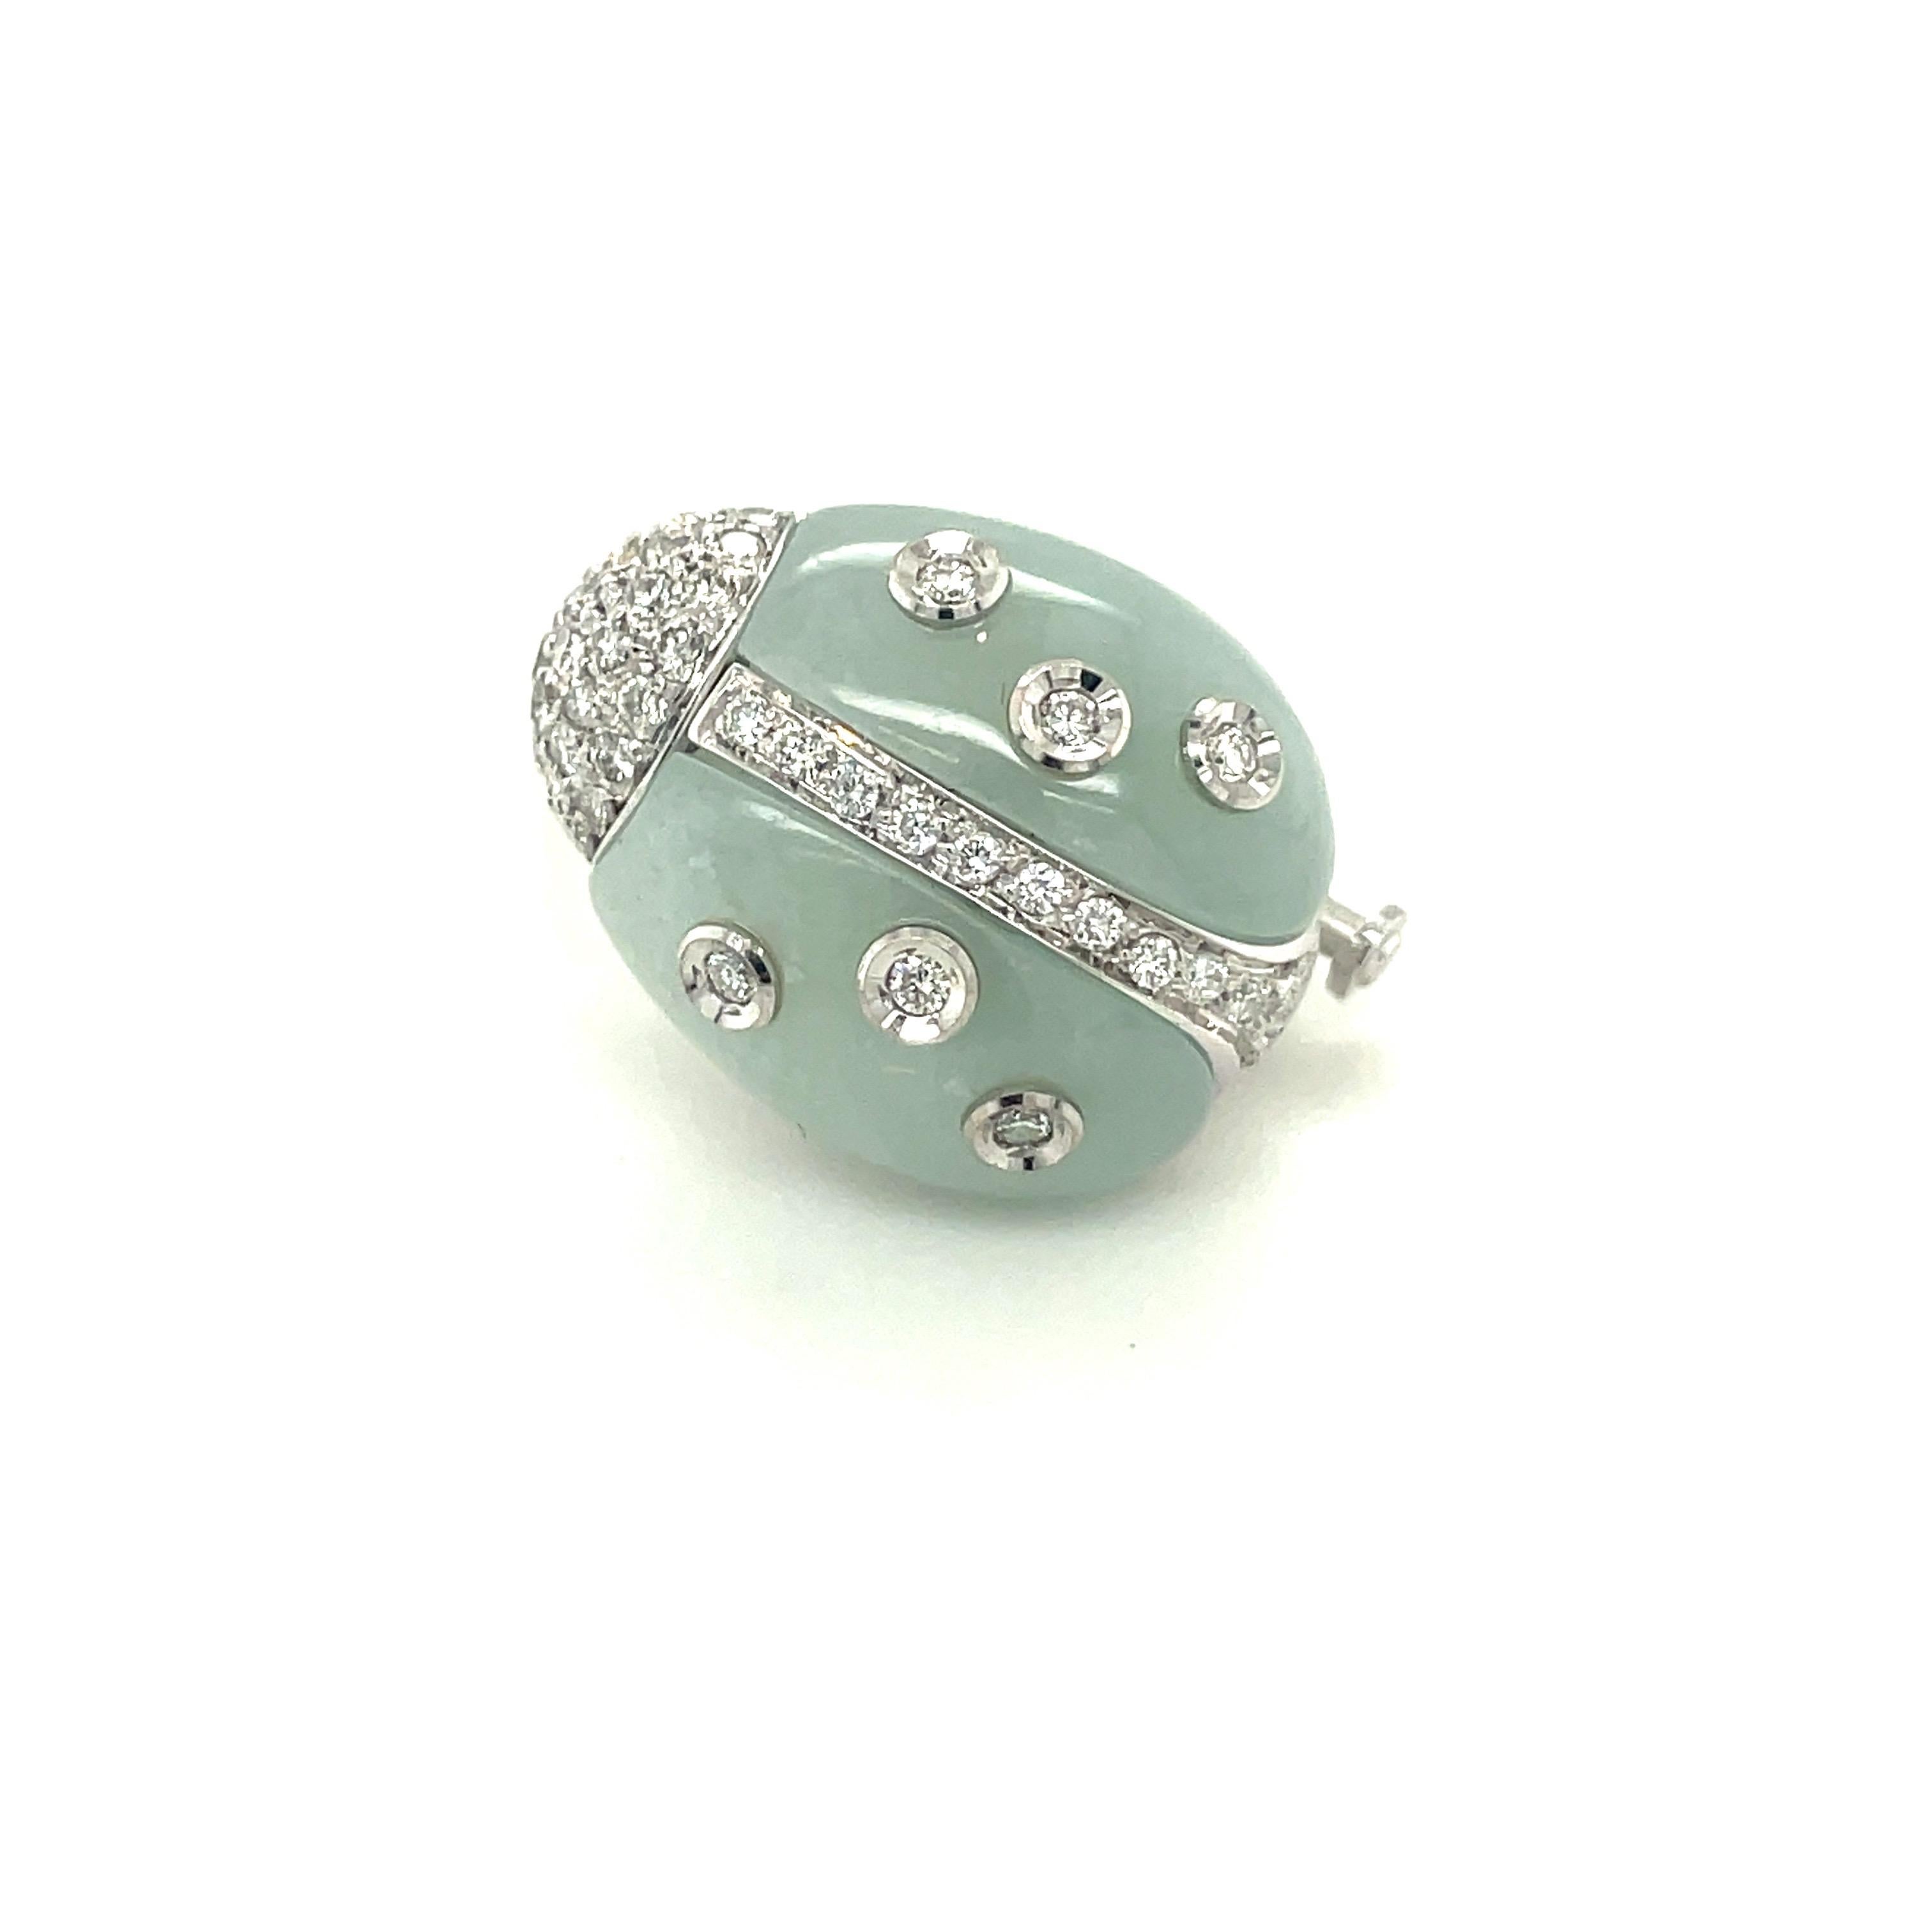 Lovely 18 karat ladybug brooch. The brooch is designed with polished aquamarine stones , accented with round brilliant diamonds set in white gold. The brooch measures 19mm.
Total diamond weight 0.33 carats
Signed Italy 18k 750